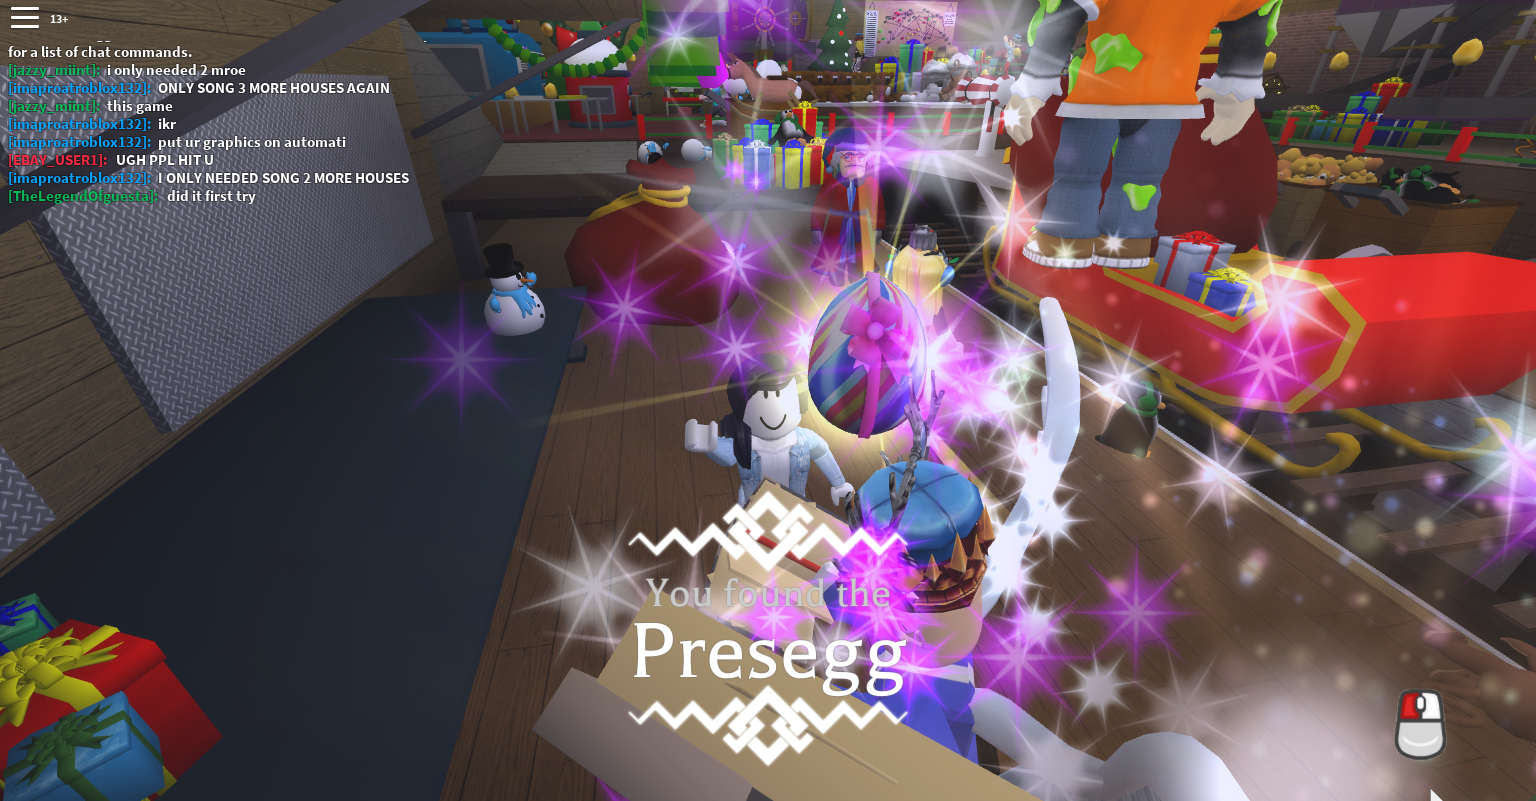 Aveyn S Blog Roblox Egg Hunt 2018 How To Find The Presegg In - roblox blog egg hunt